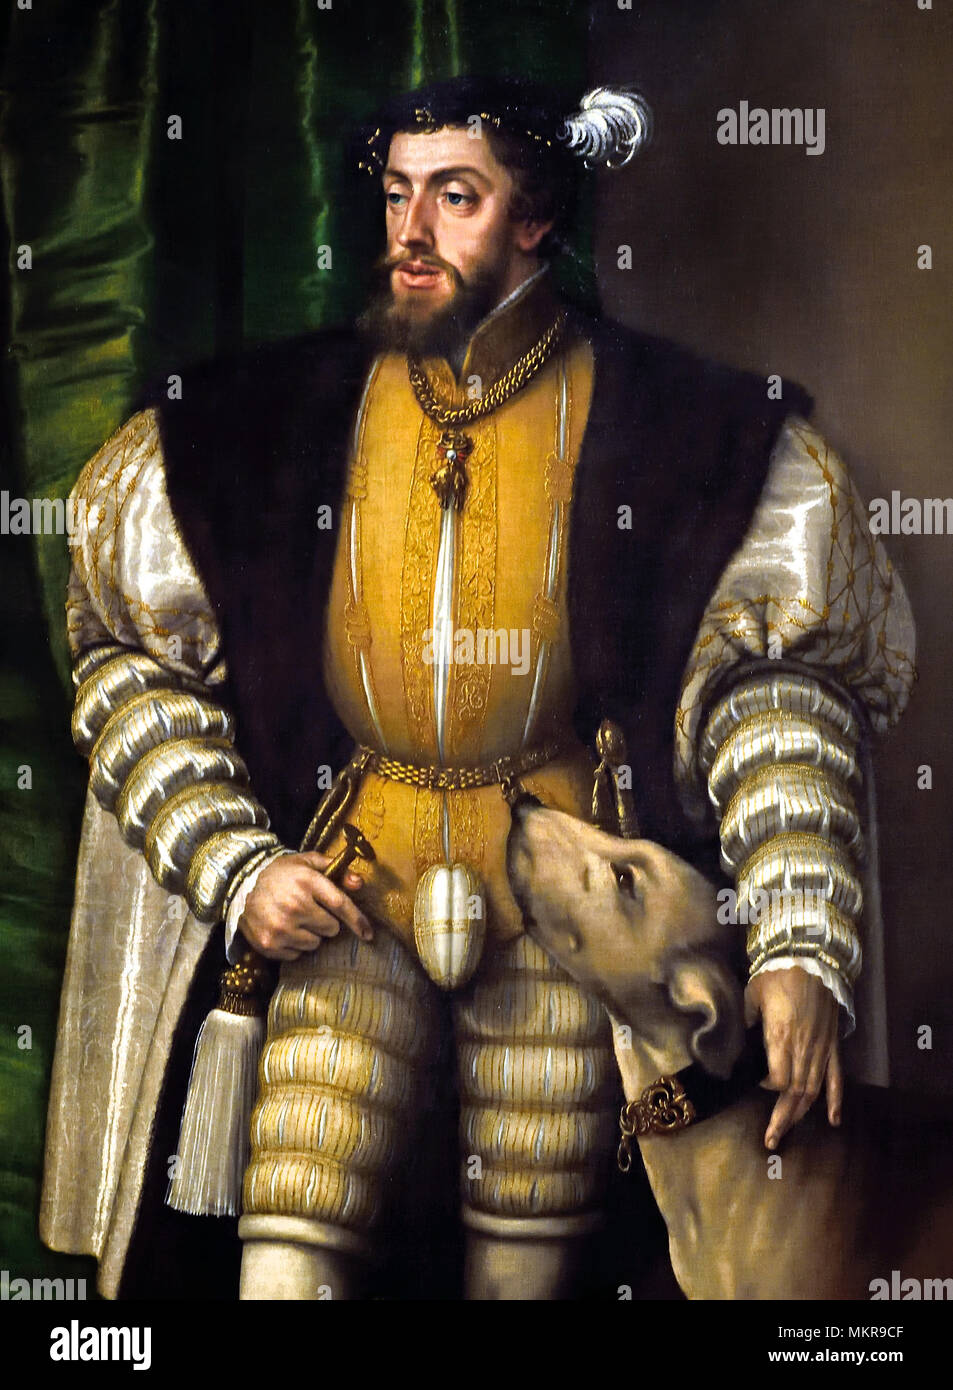 Charles V, Holy Roman Emperor  (with his English water dog), 1532.by Jakob Seisenegger (1504/5 - 1567) Austrian Austria, 16th Century, ( Charles V was ruler of both the Spanish Empire from 1516 and the Holy Roman Empire from 1519, as well as of the lands of the former Duchy of Burgundy from 1506 ) Stock Photo